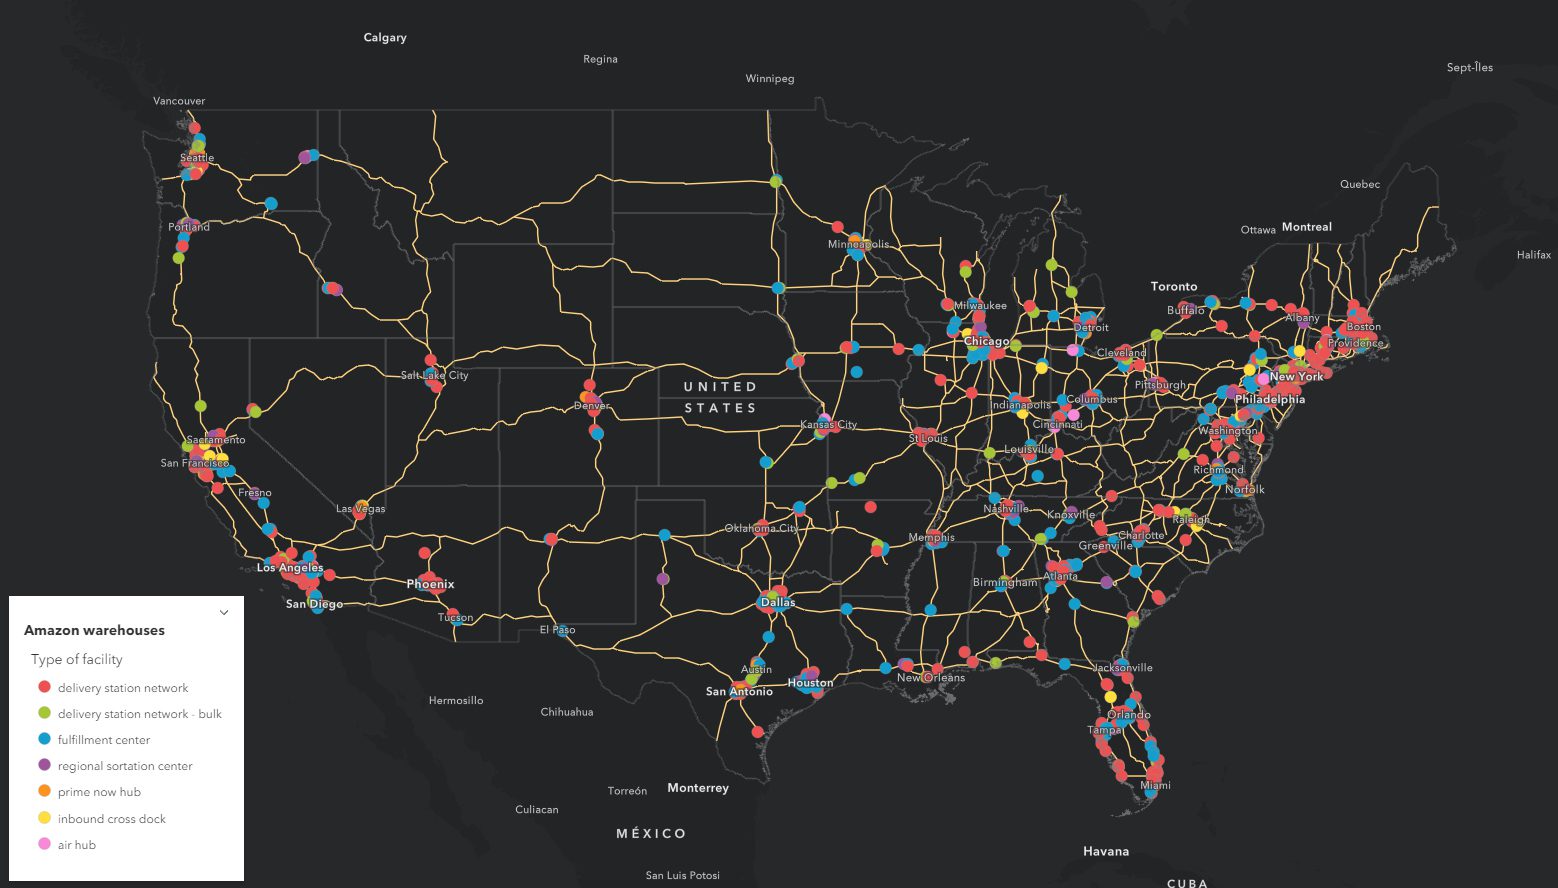 Map of the U.S. shows how Amazon locates along major highways, to have easy access to customers.